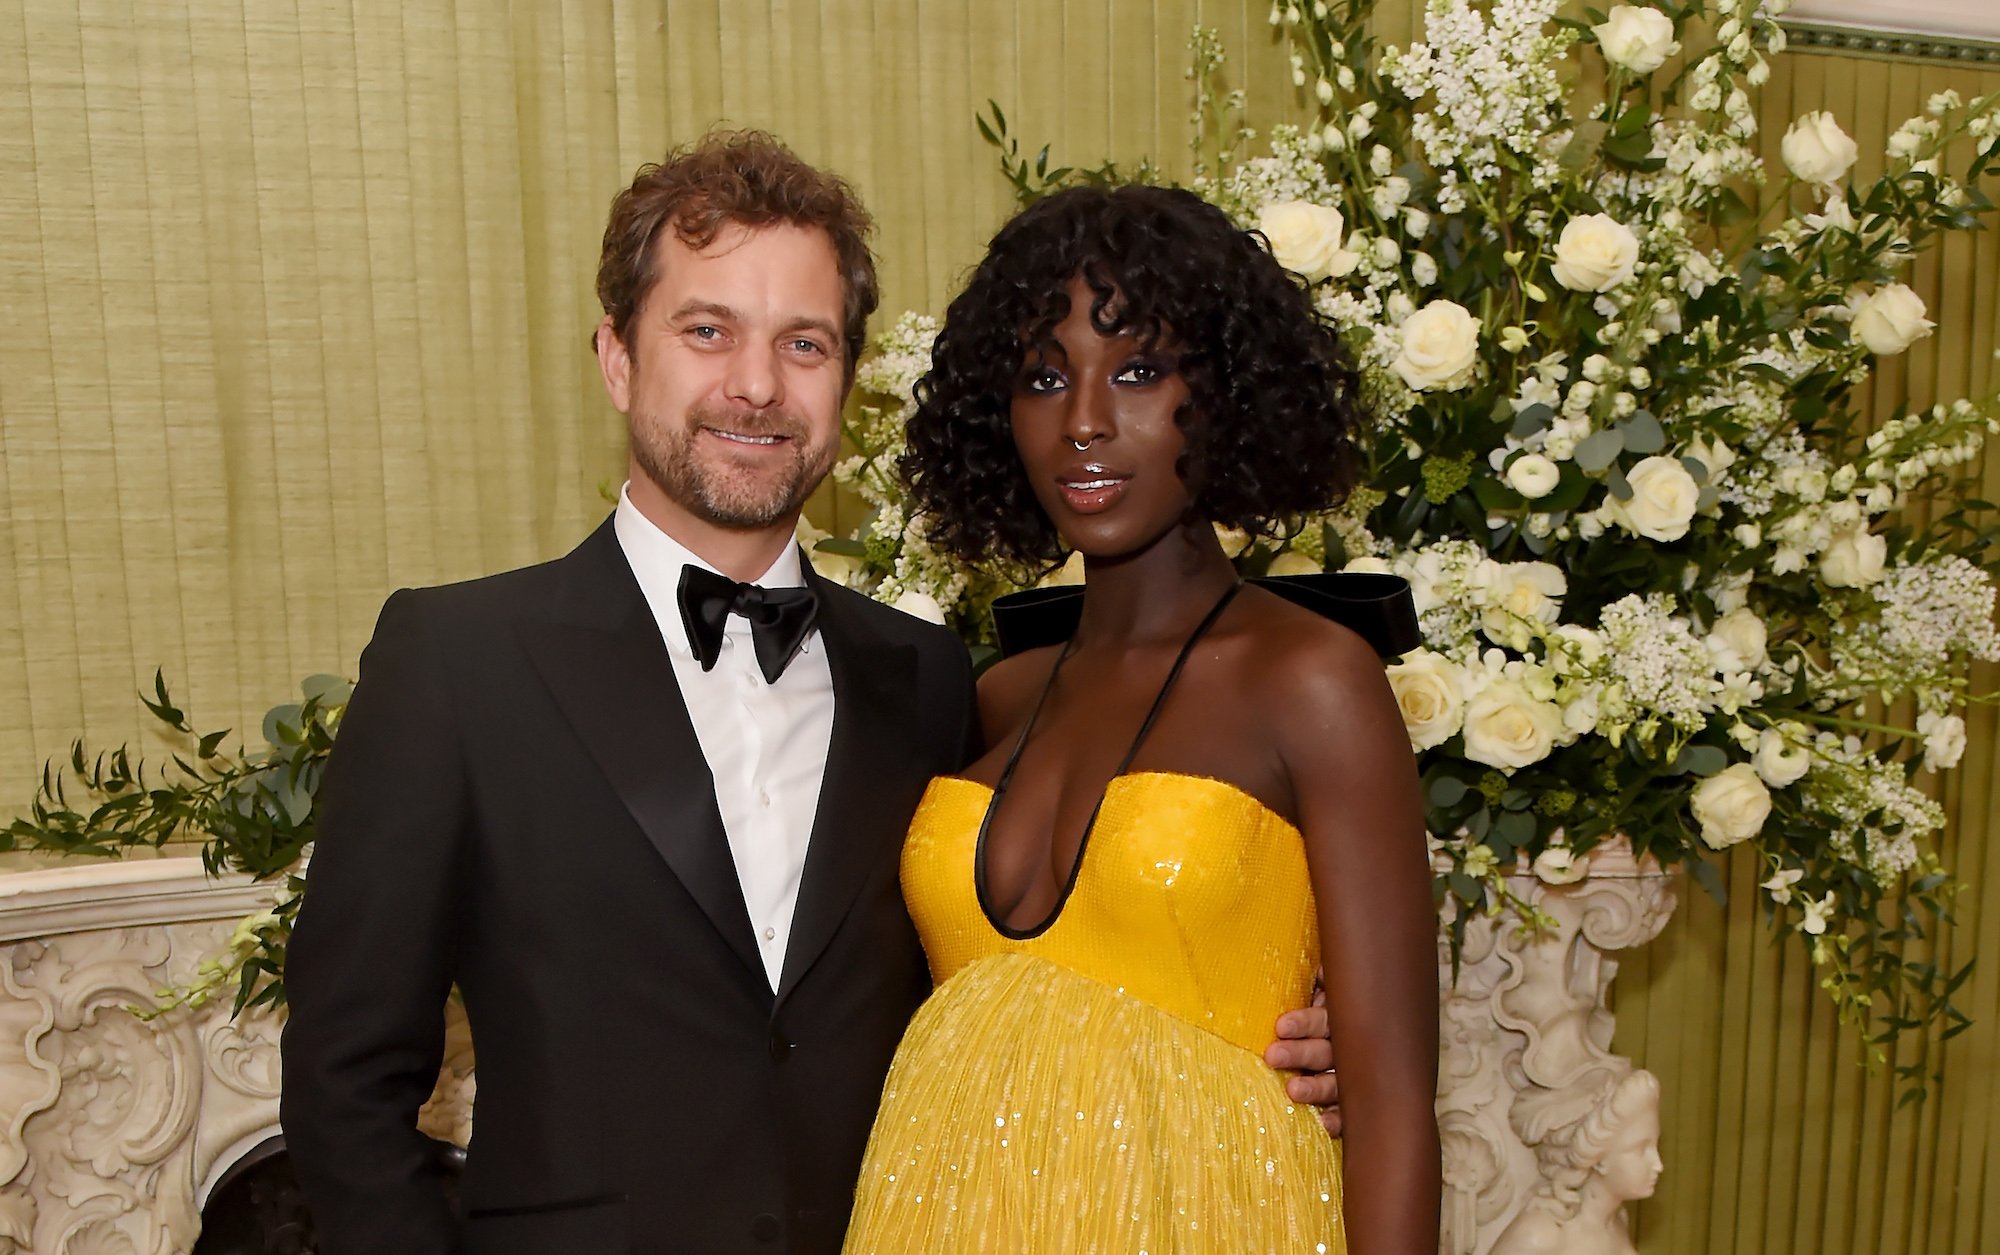 Joshua Jackson and wife Jodie Turner-Smith smiling in front of a white floral arrangement